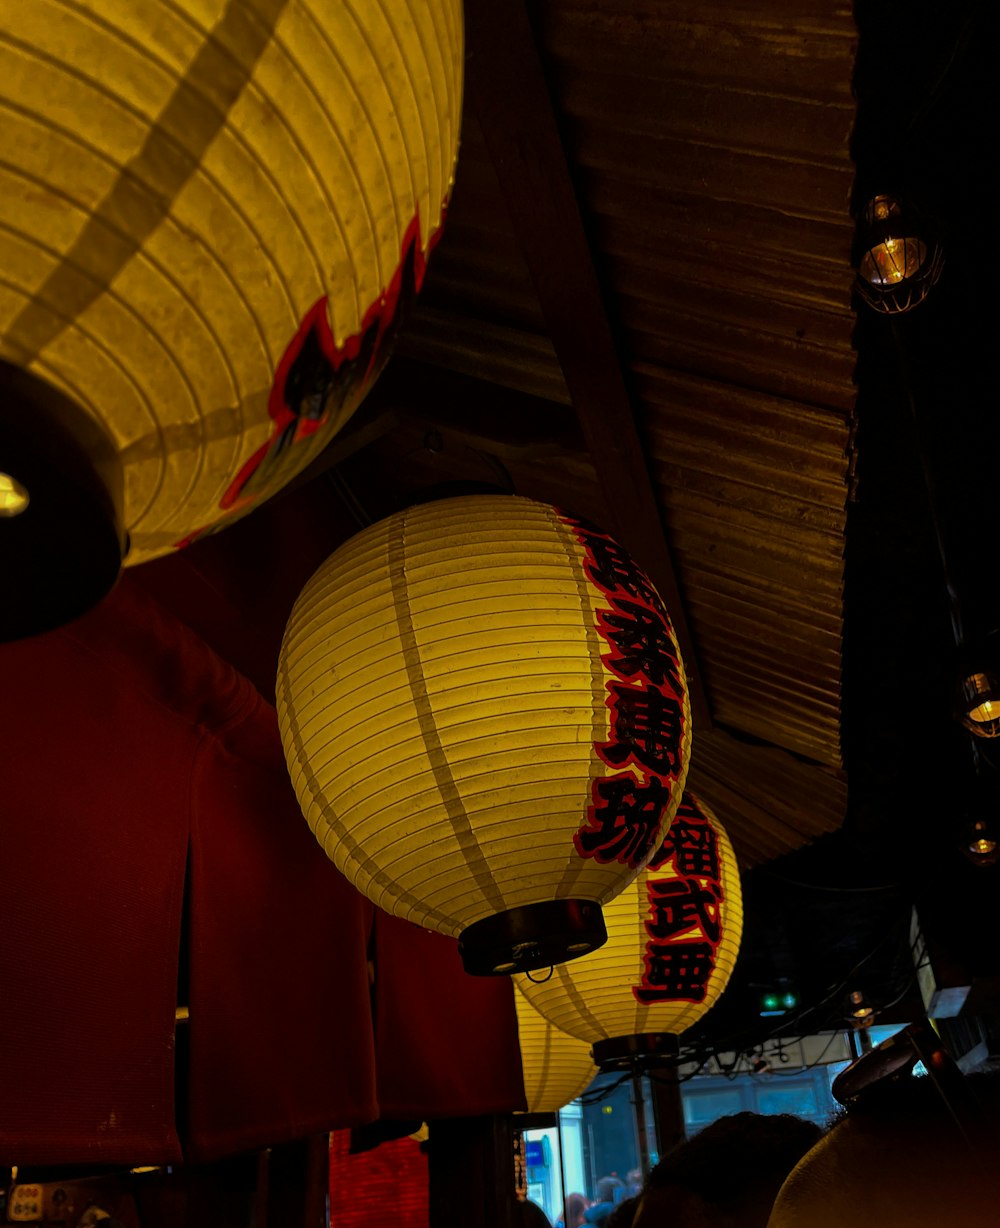 a group of lanterns from a ceiling